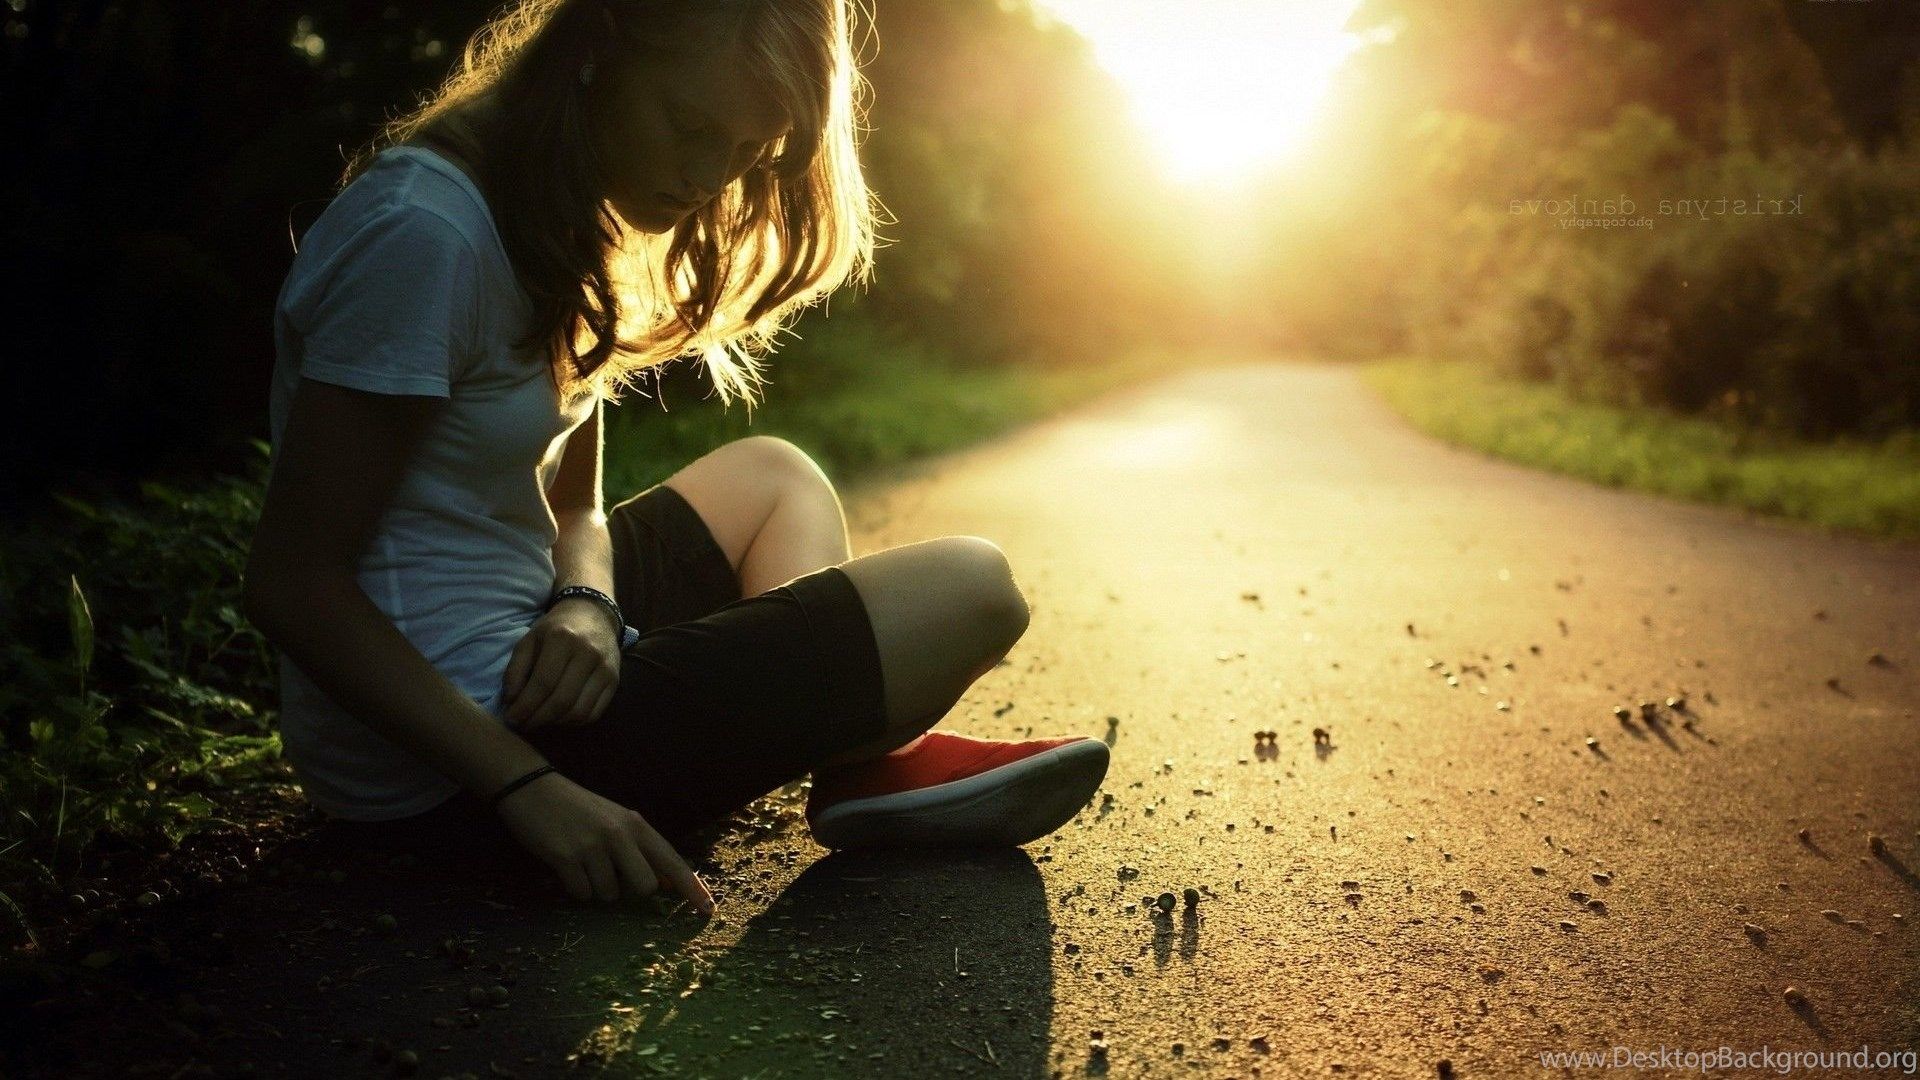 Lonely Girl On The Road Wallpaper Photography Wallpaper Desktop Background